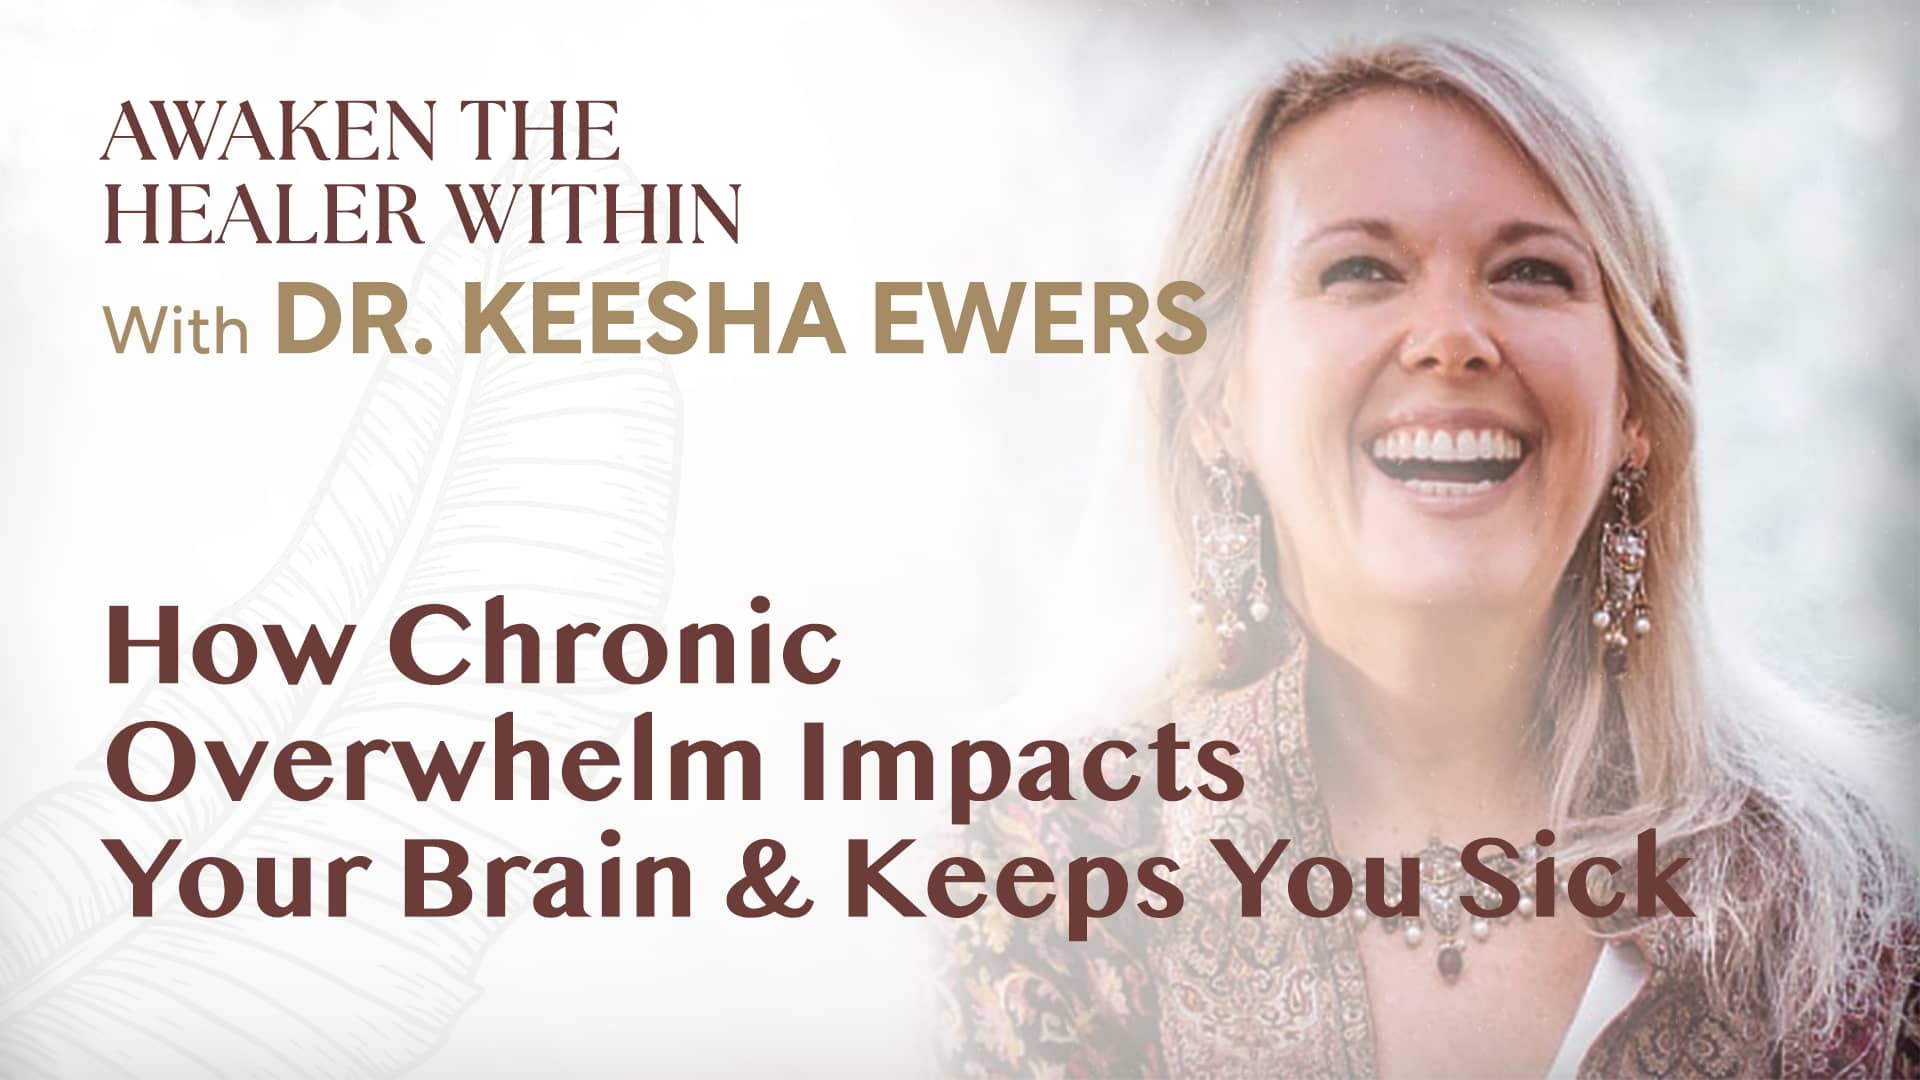 How Chronic Overwhelm Impacts Your Brain & Keeps You Sick